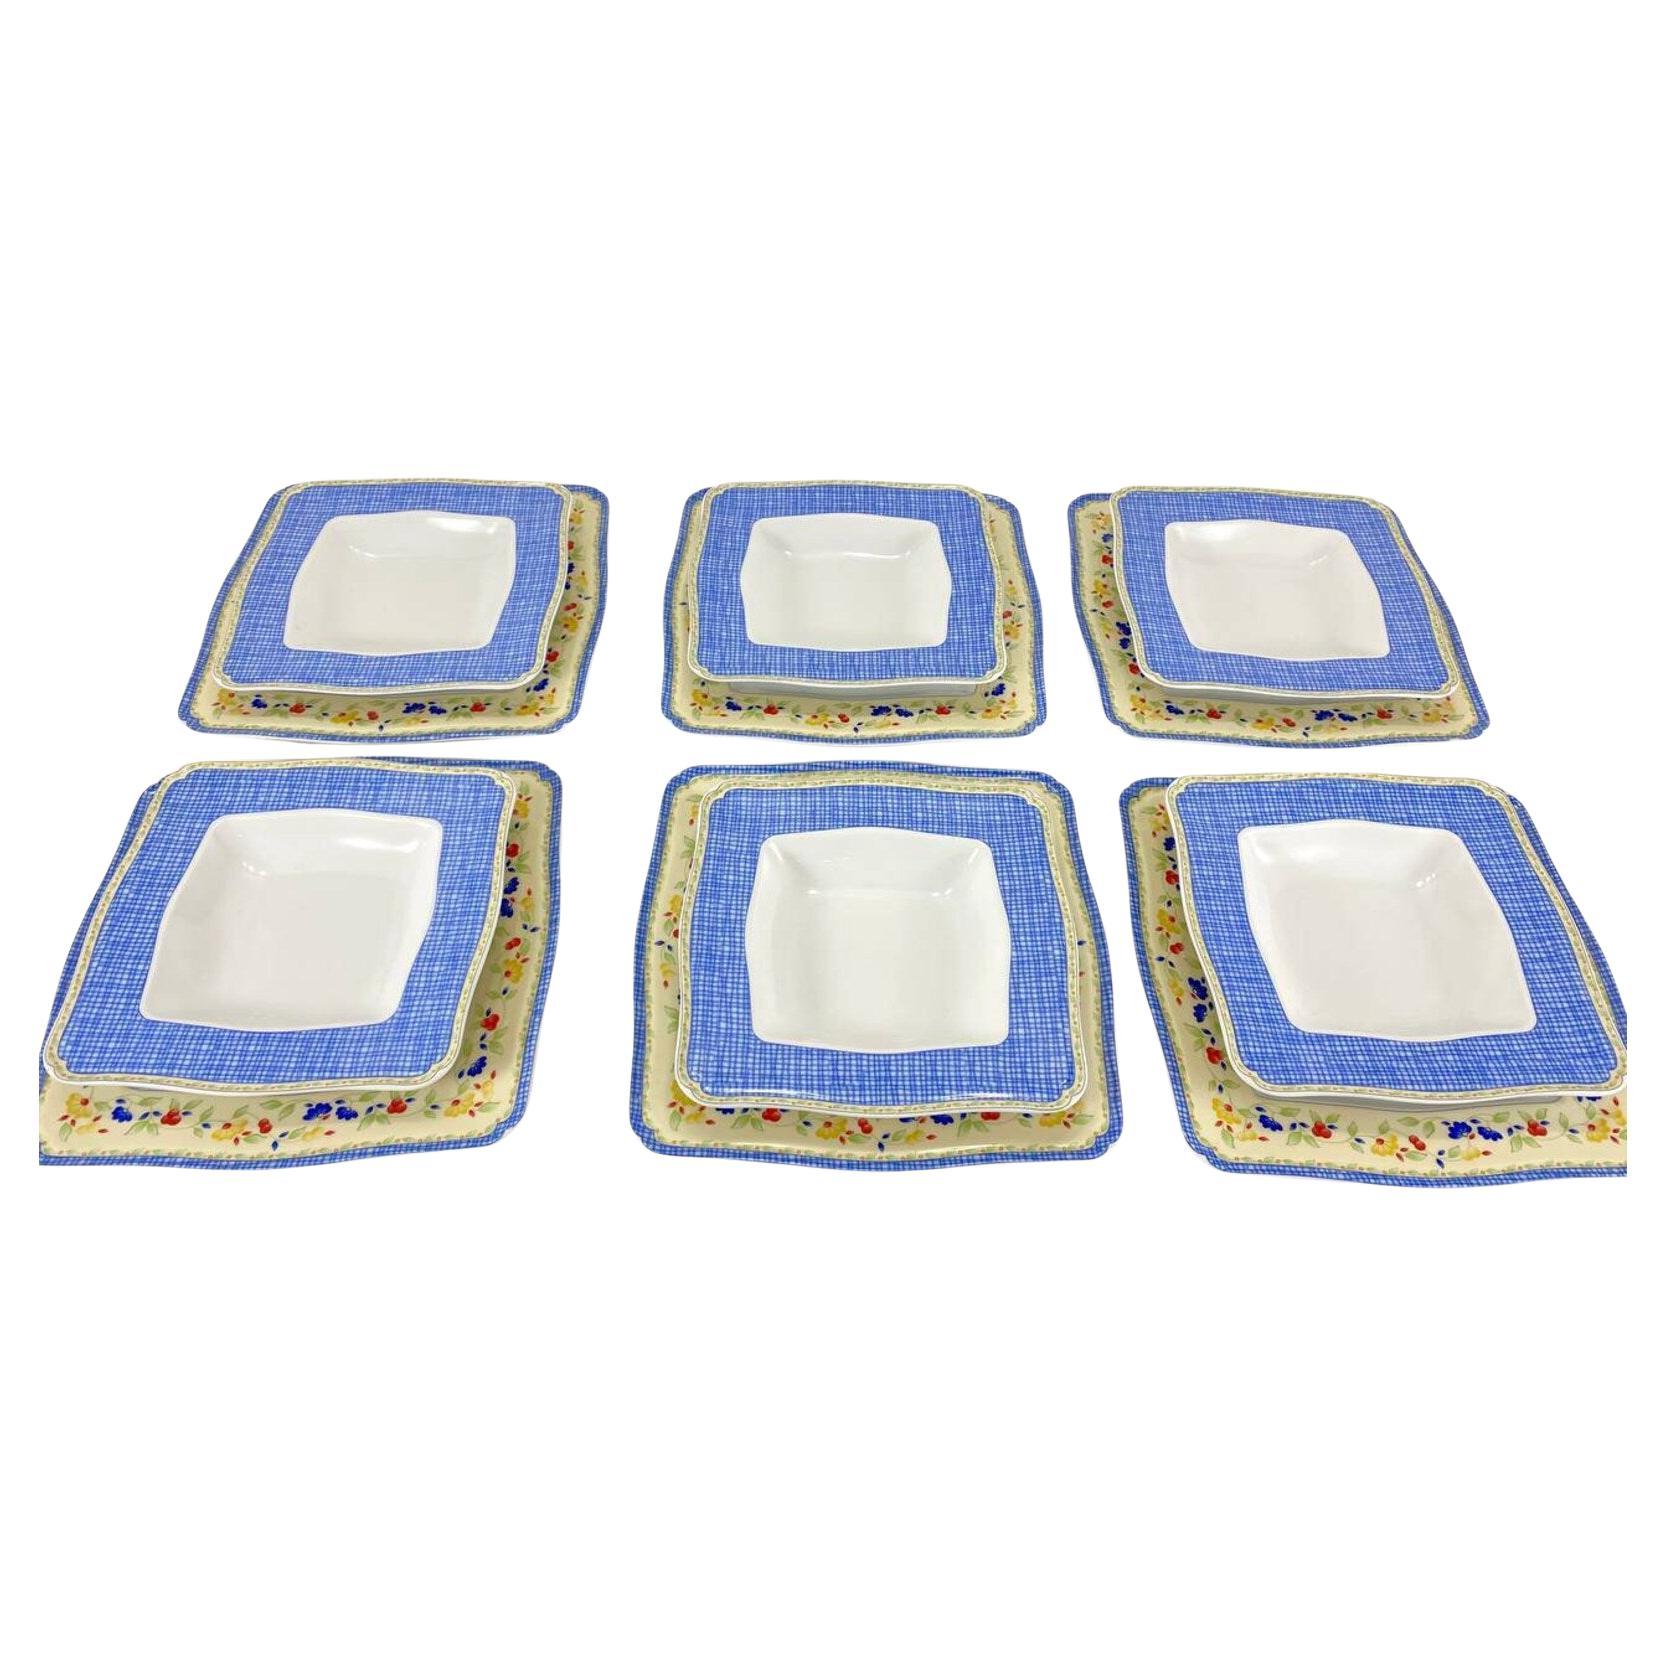 Beautiful Square Plates Van Well  Six Charger Plates For Sale